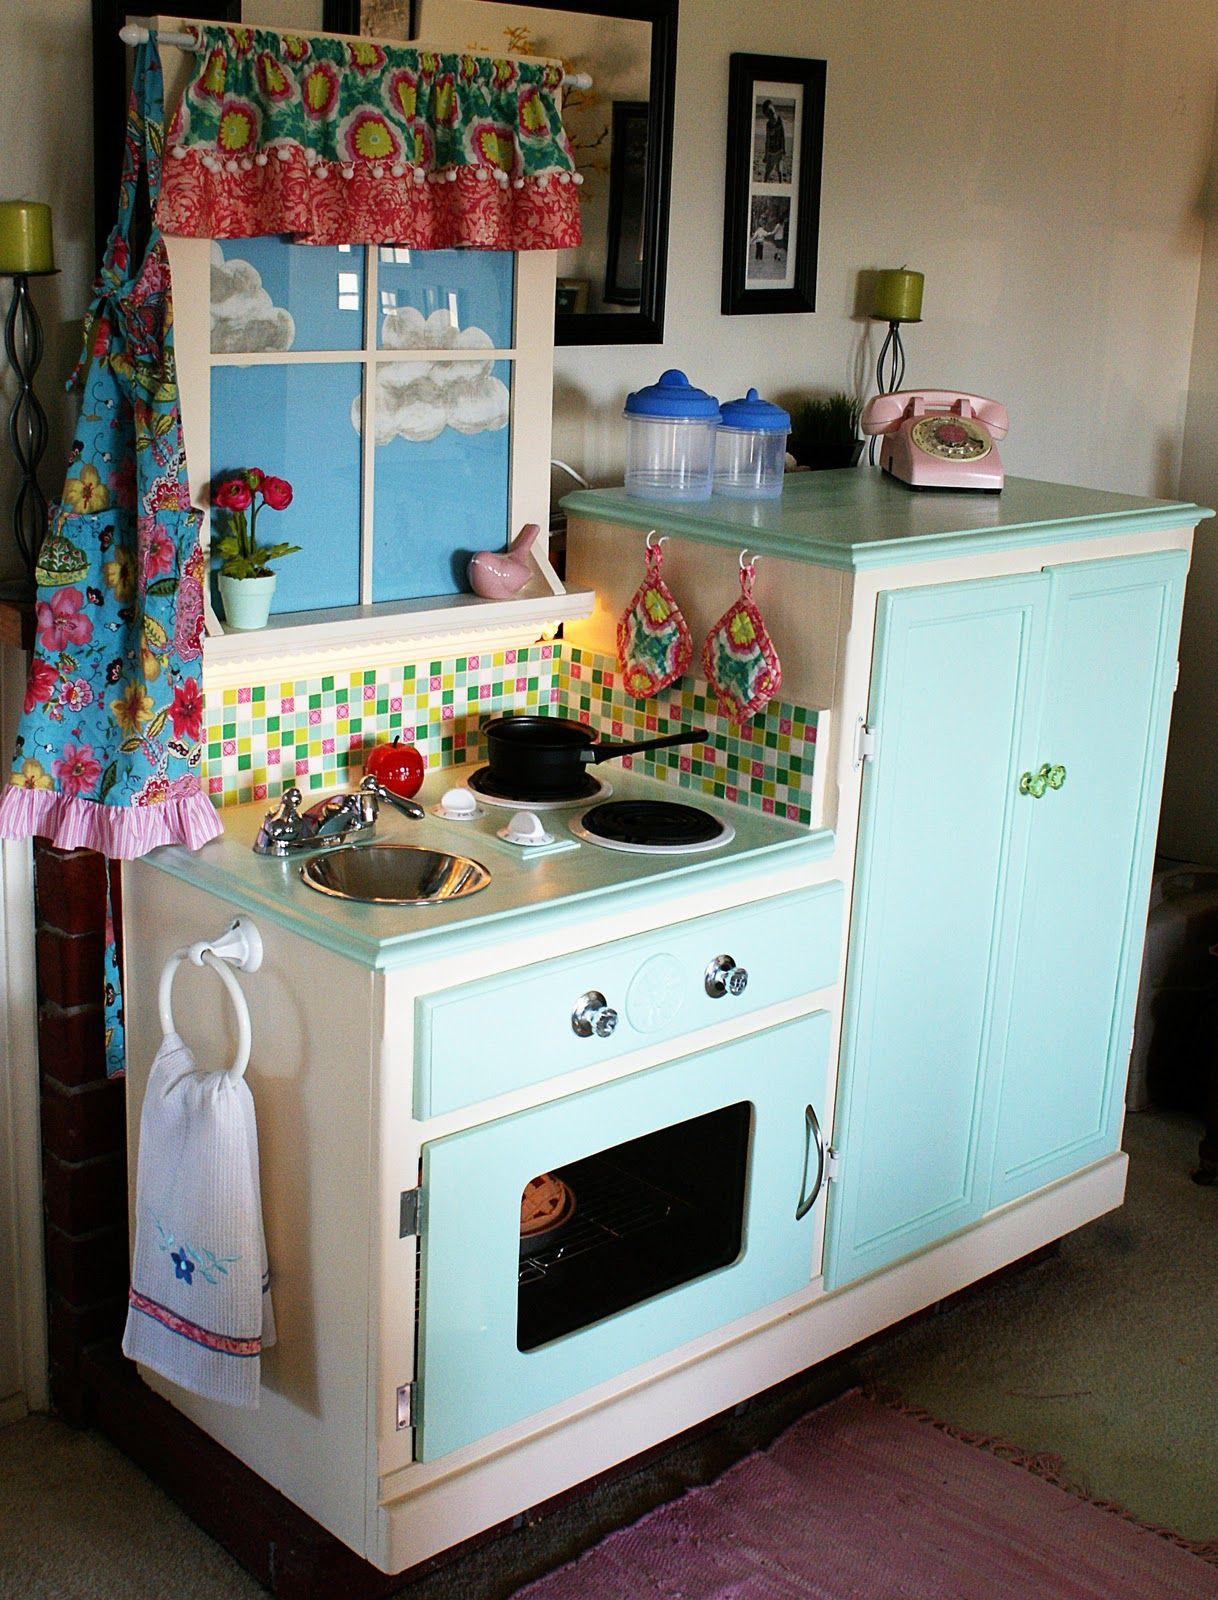 DIY Kids Kitchens
 In search of the perfect piece of furniture to repurpose